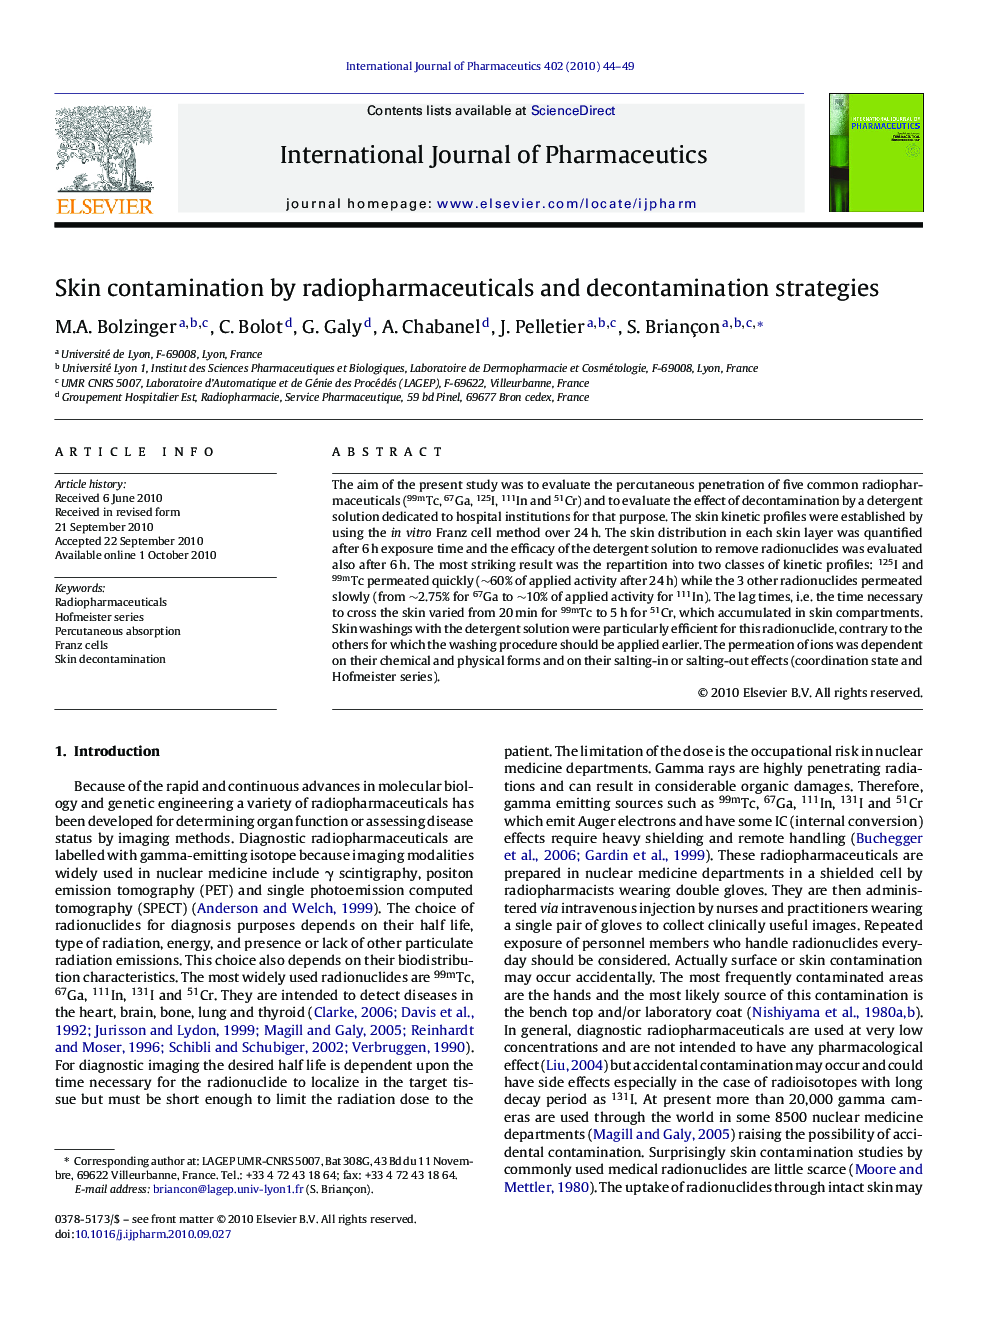 Skin contamination by radiopharmaceuticals and decontamination strategies